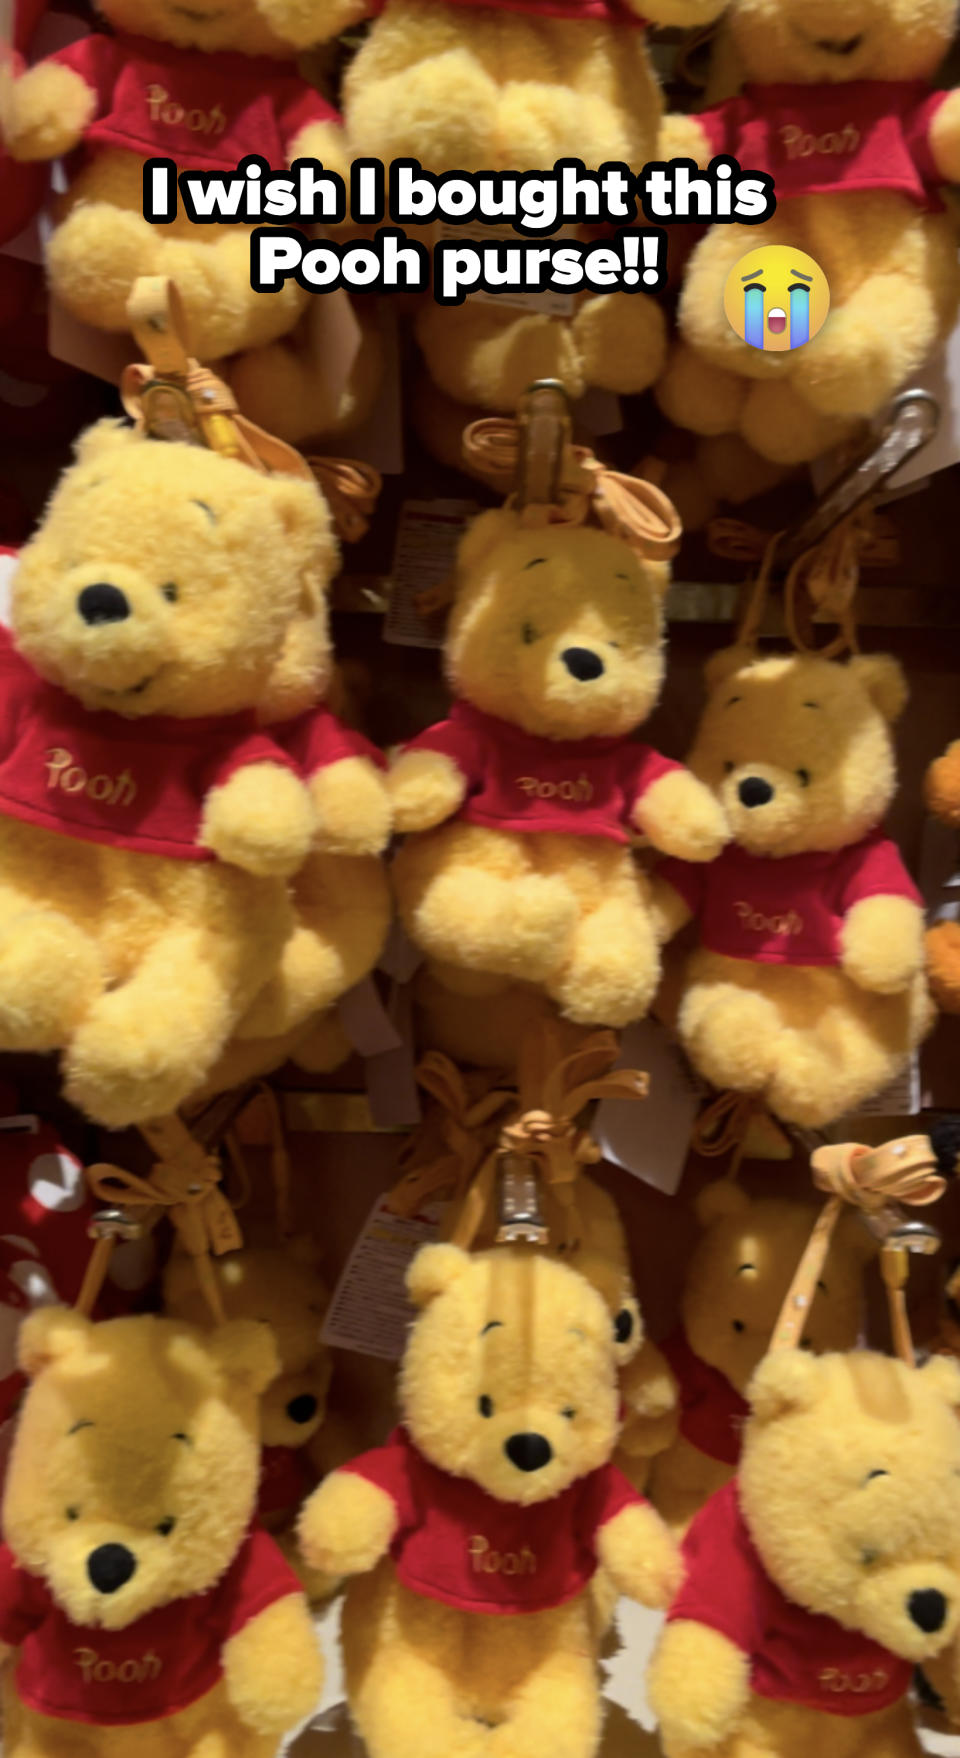 Plush toys of Winnie the Pooh wearing red shirts are displayed in multiple rows on a shelf